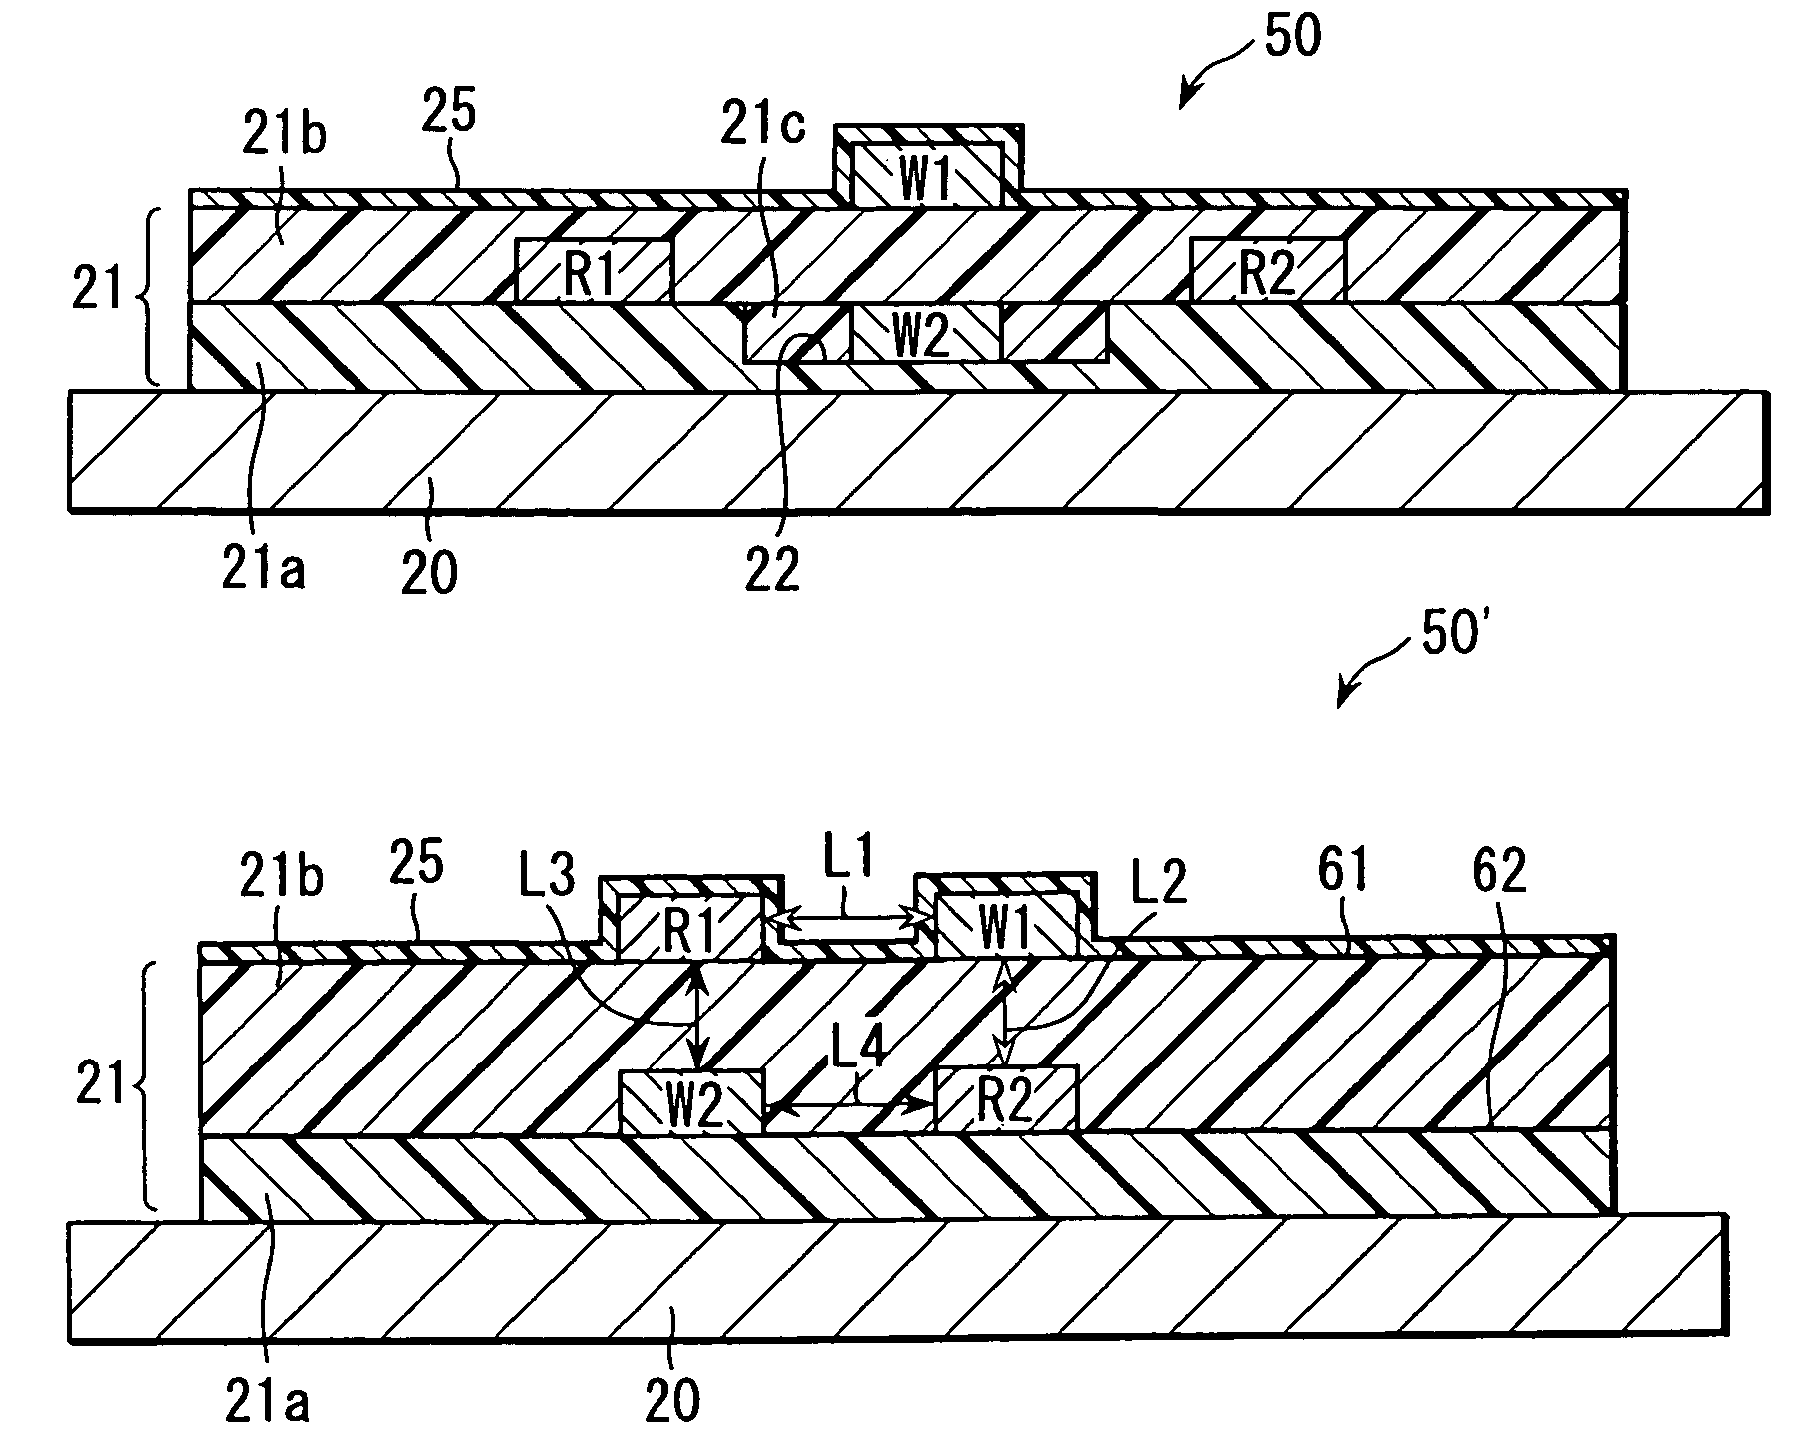 Disc drive suspension including a wired flexure with conductors arranged to reduce crosstalk